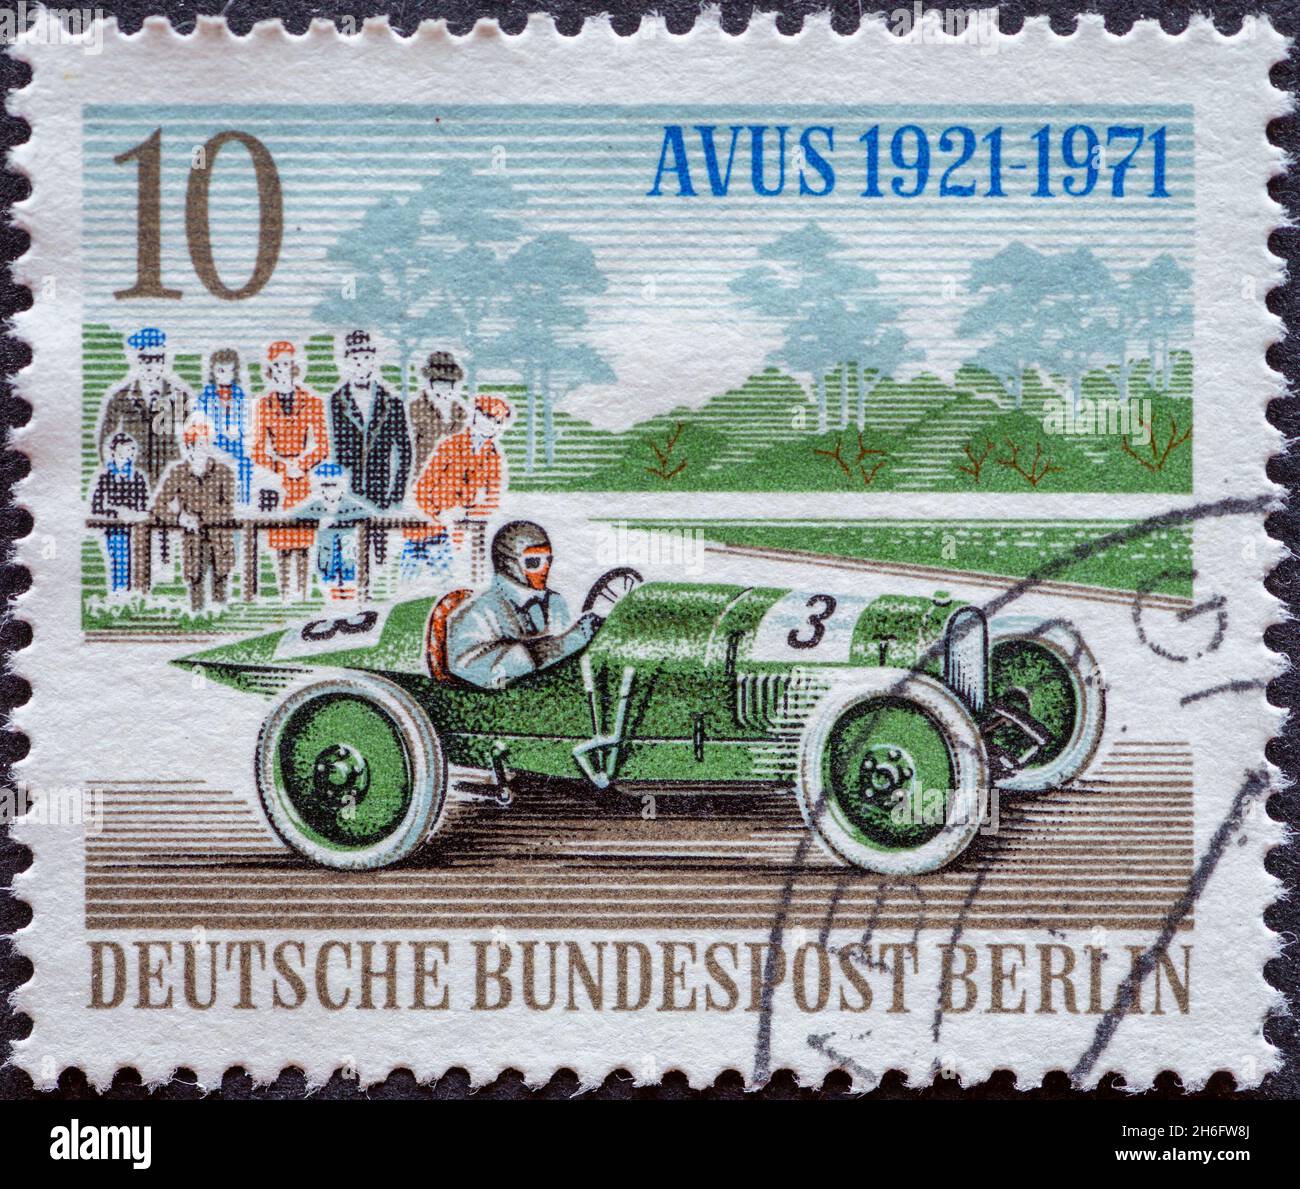 GERMANY, Berlin - CIRCA 1971 a postage stamp from Germany, Berlin showing Racing car for the 50th anniversary of the Avus race: Opel racing car around Stock Photo